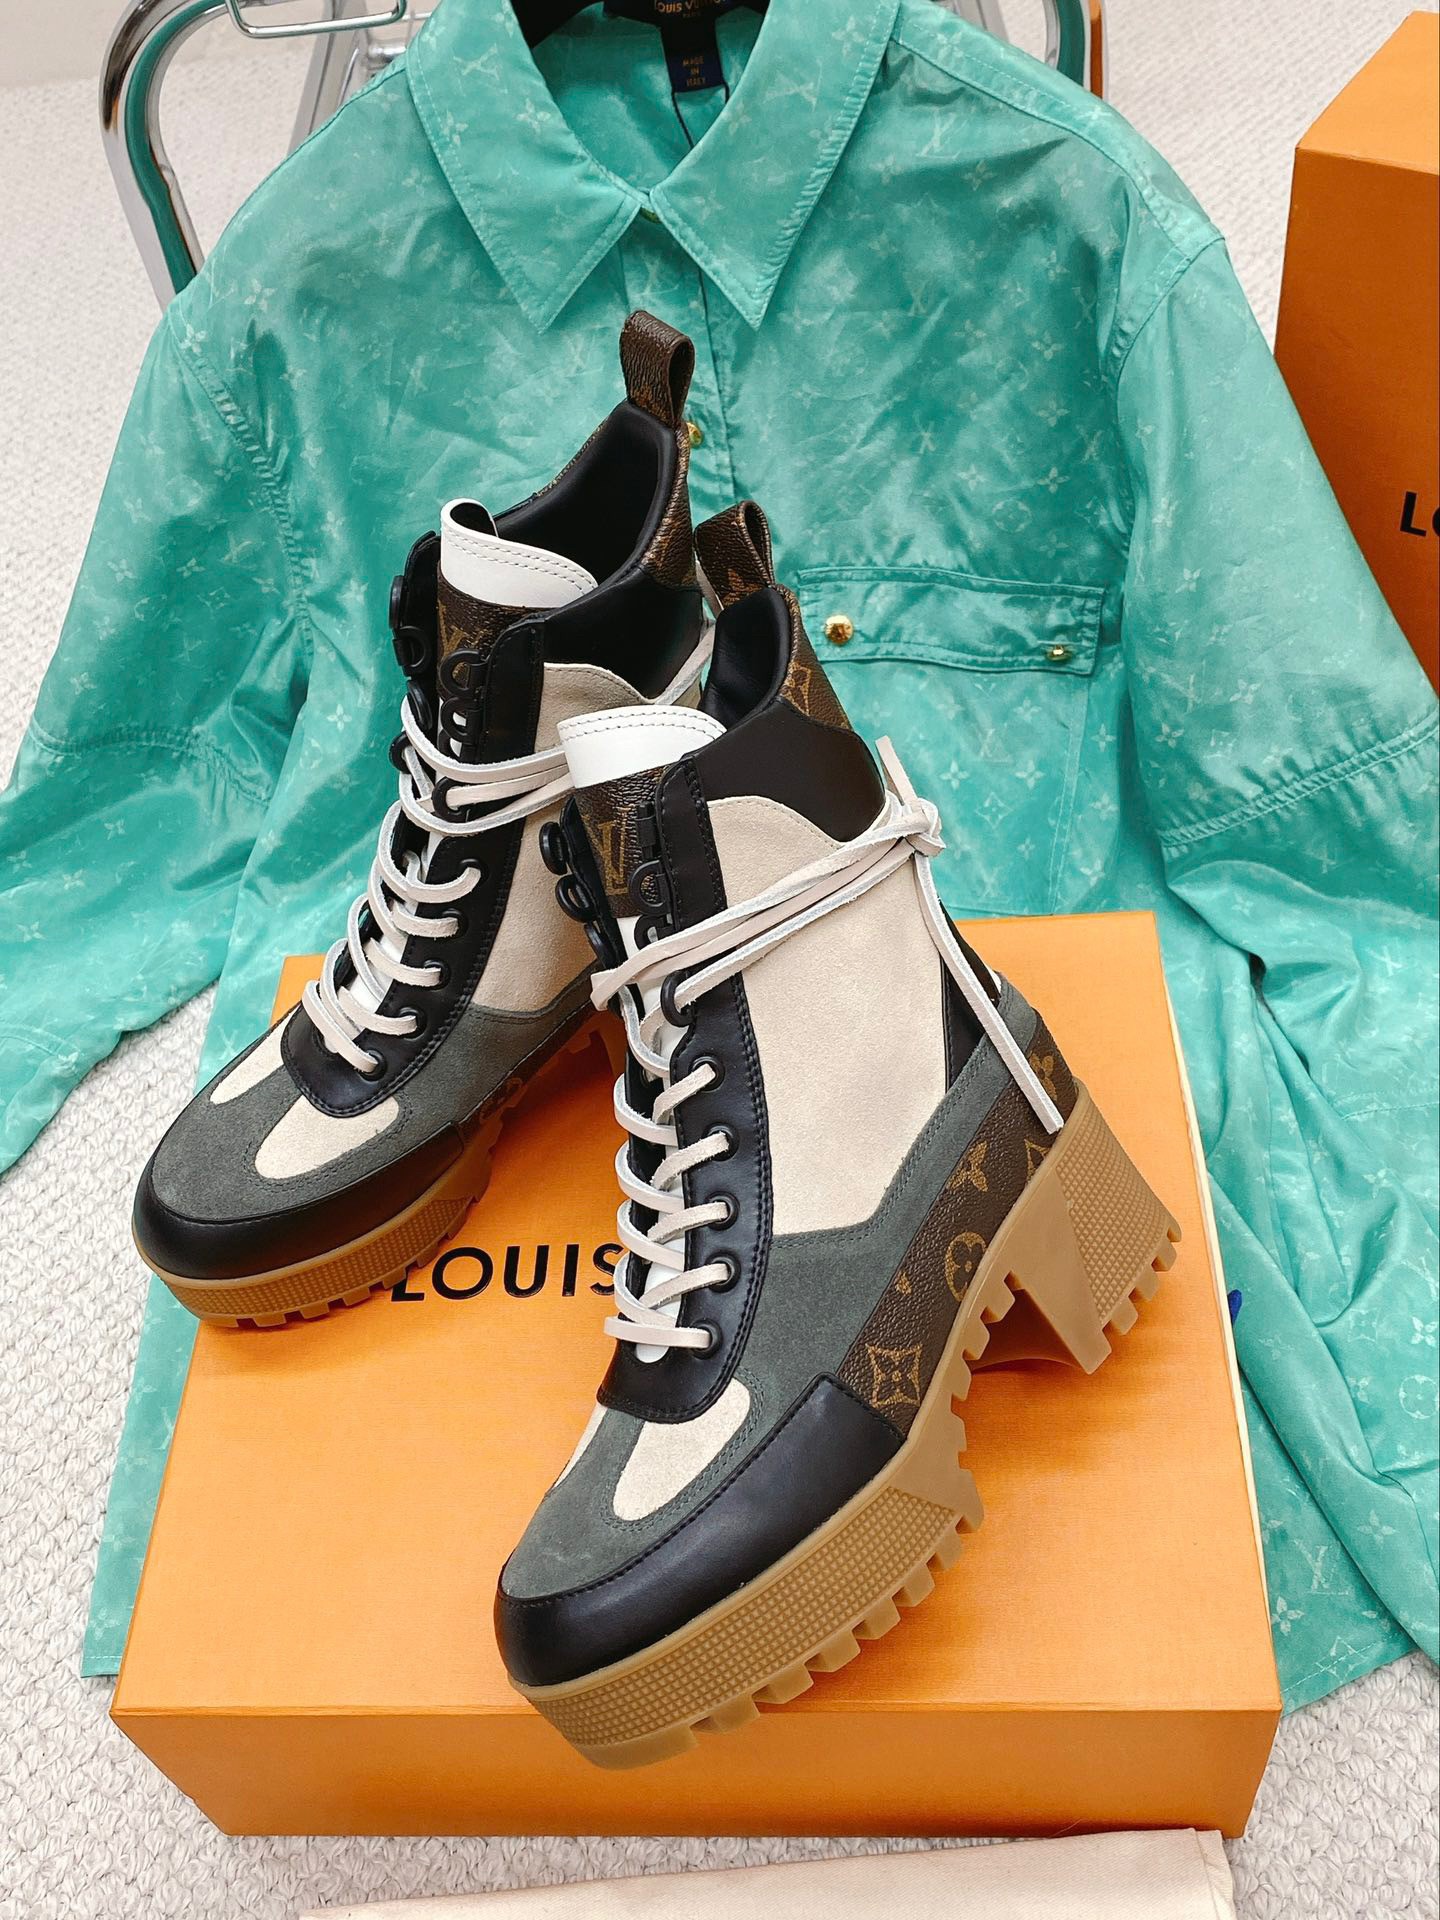 Replica Louis Vuitton Territory Flat High Boots In White Leather